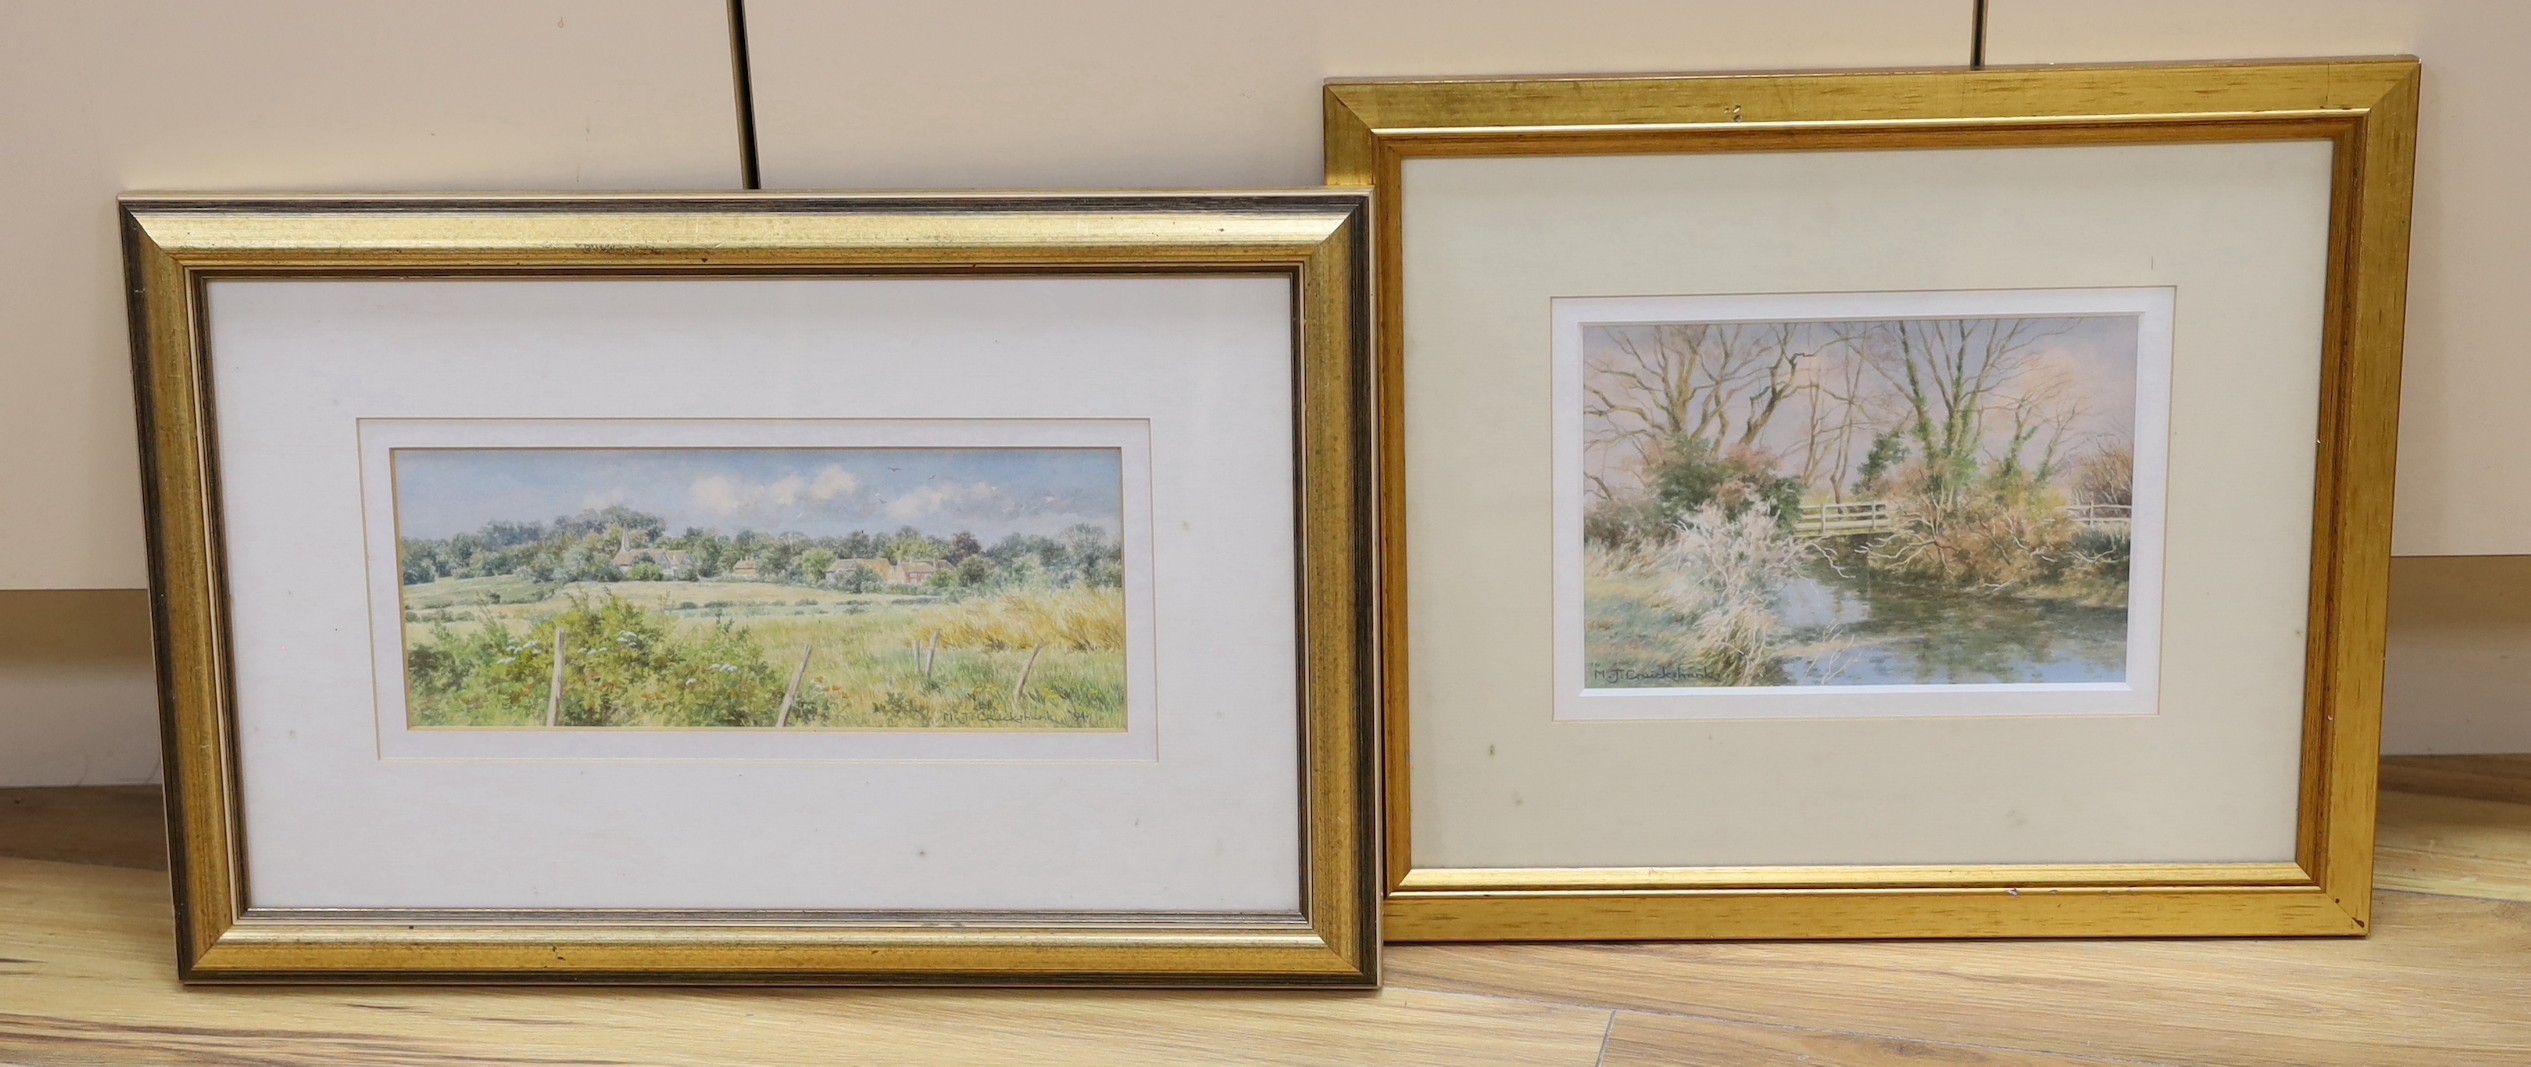 Michael J. Cruickshank (20th C.), two watercolours, 'Frosted Banks, Whitebridge' and 'Barcombe